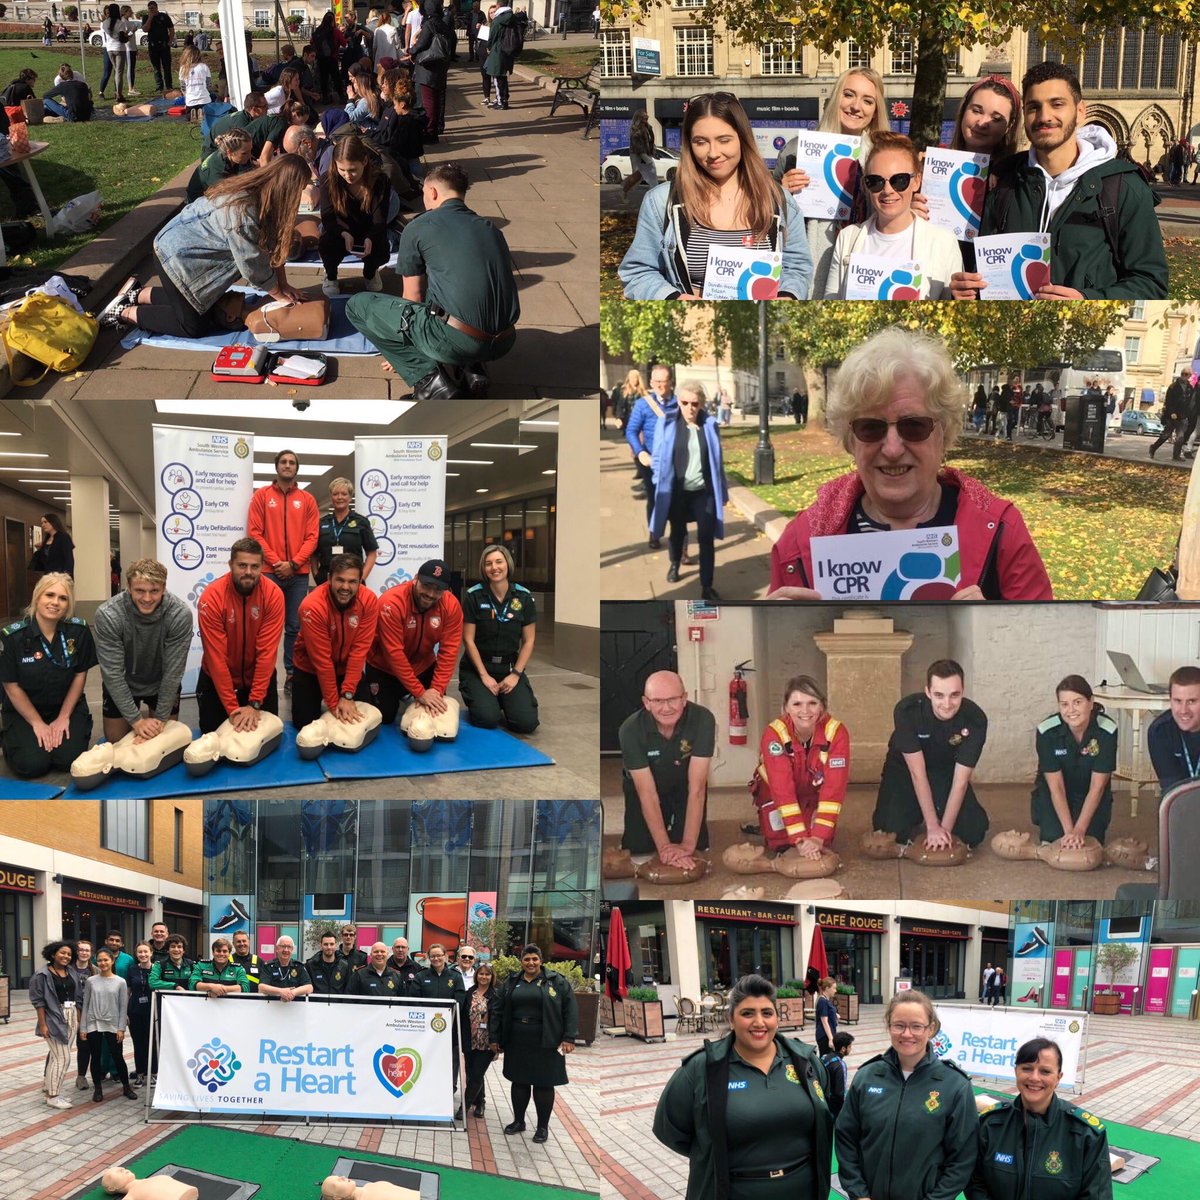 We are proud to announce a total of 16,046 people were taught #CPR by our staff and volunteers for Restart a Heart Day! Thank you to everyone for taking part, including our partner agencies. Same time again next year?